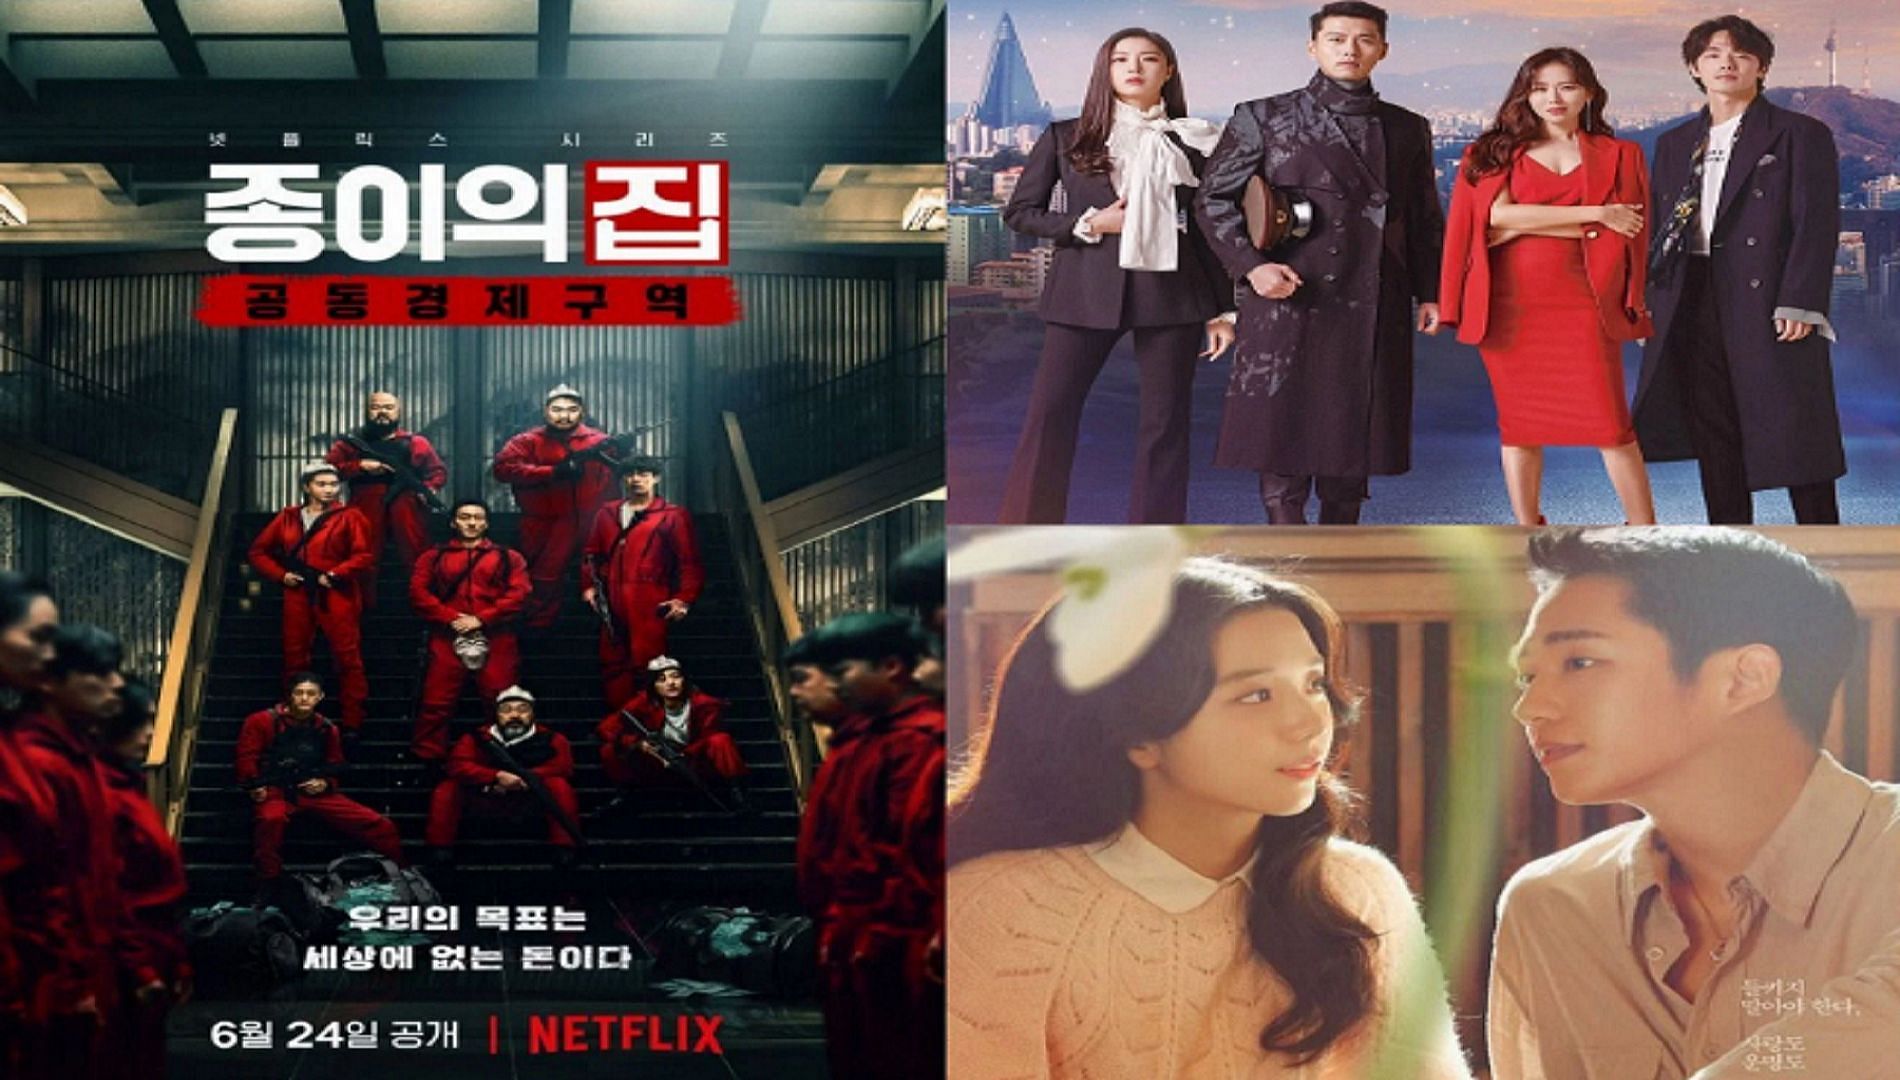 Top 10 K-dramas on North Korea you should watch: Snowdrop, CLOY, and more